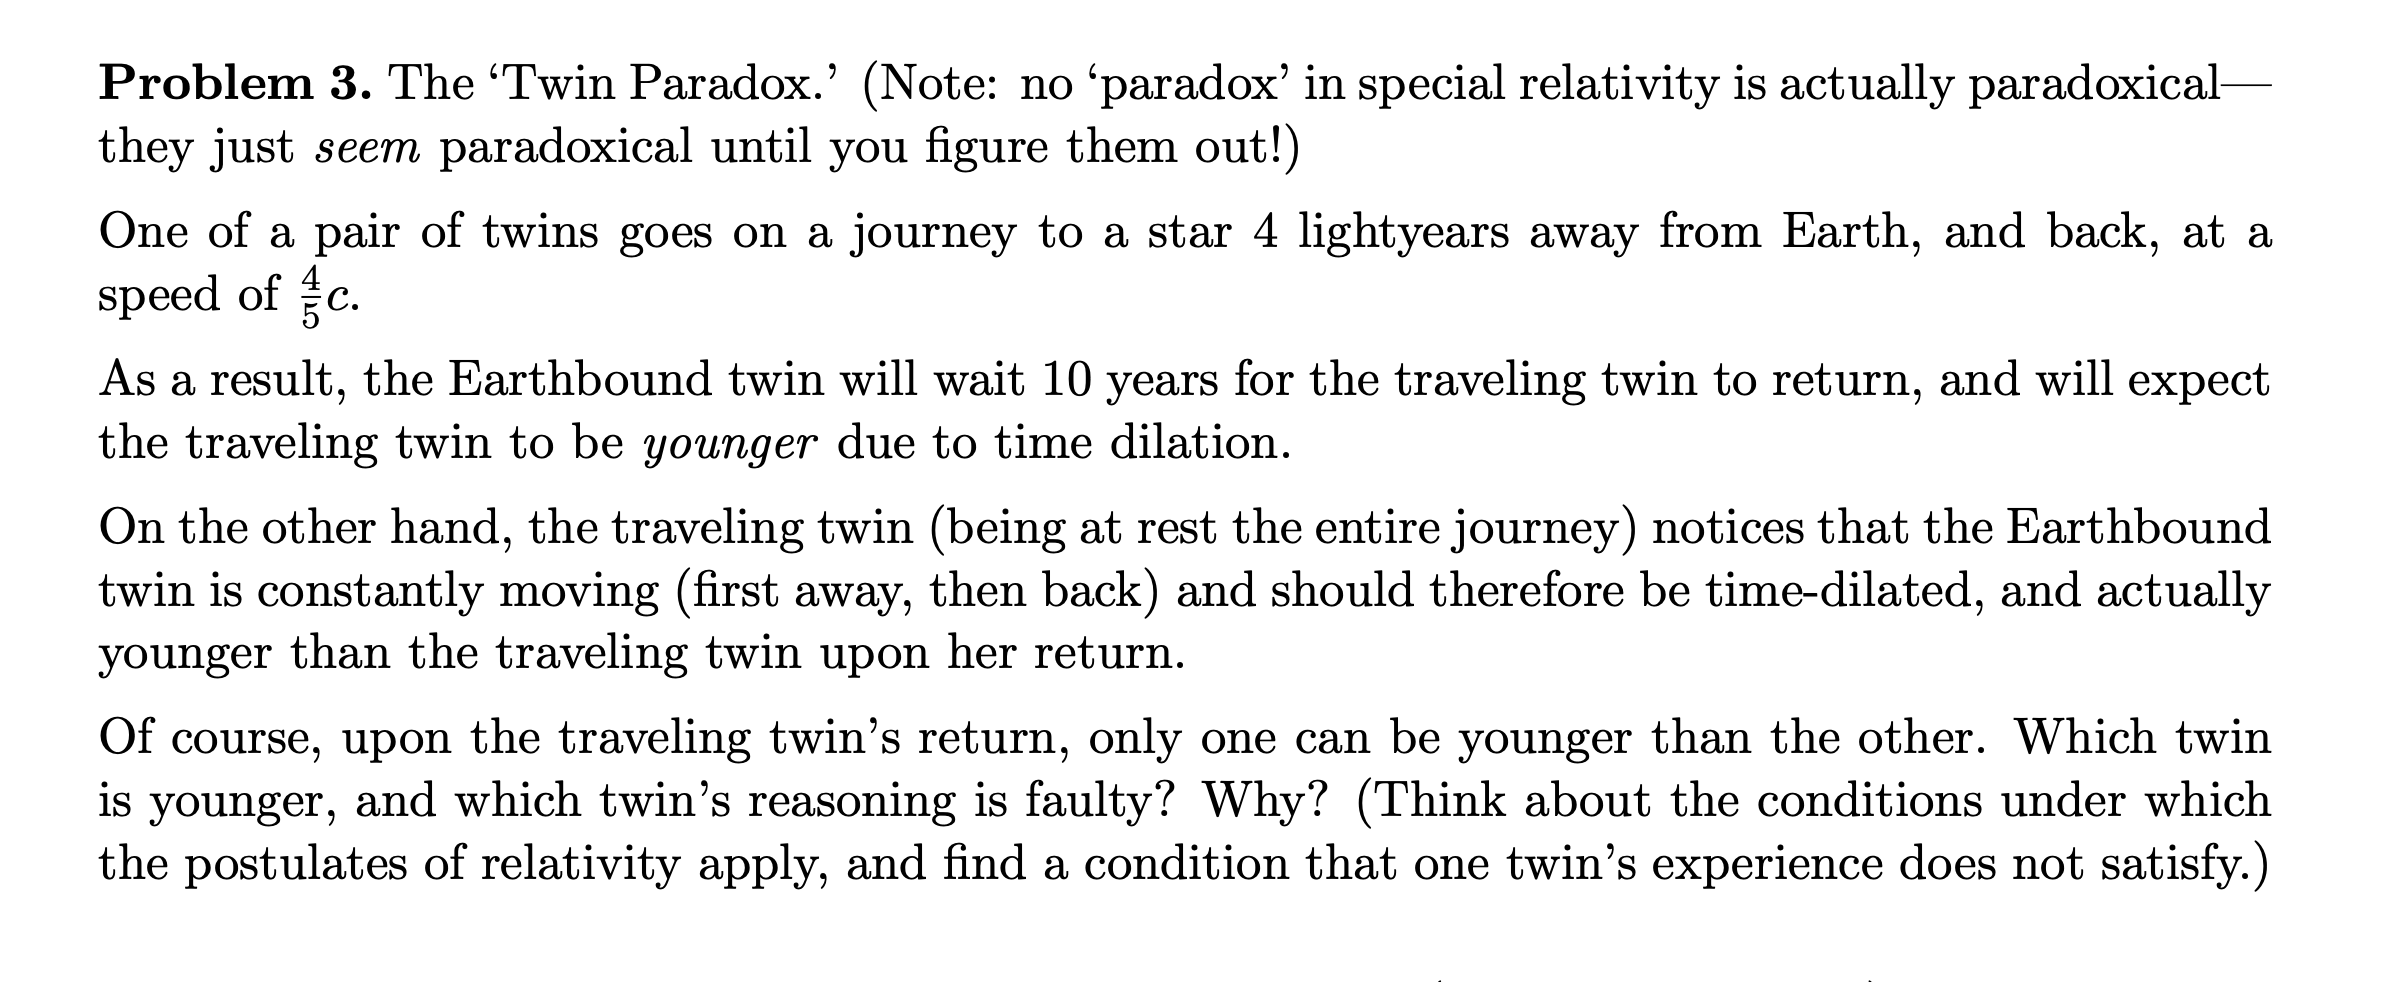 Problem 3. The 'Twin Paradox.' (Note: no 'paradox' in special relativity is actually paradoxical-
they just seem paradoxical until you figure them out!)
One of a pair of twins goes on a journey to a star 4 lightyears away from Earth, and back, at a
speed of c.
As a result, the Earthbound twin will wait 10 years for the traveling twin to return, and will expect
the traveling twin to be younger due to time dilation.
On the other hand, the traveling twin (being at rest the entire journey) notices that the Earthbound
twin is constantly moving (first away, then back) and should therefore be time-dilated, and actually
younger than the traveling twin upon her return.
Of course, upon the traveling twin's return, only one can be younger than the other. Which twin
younger, and which twin's reasoning is faulty? Why? (Think about the conditions under which
the postulates of relativity apply, and find a condition that one twin's experience does not satisfy.)
is
